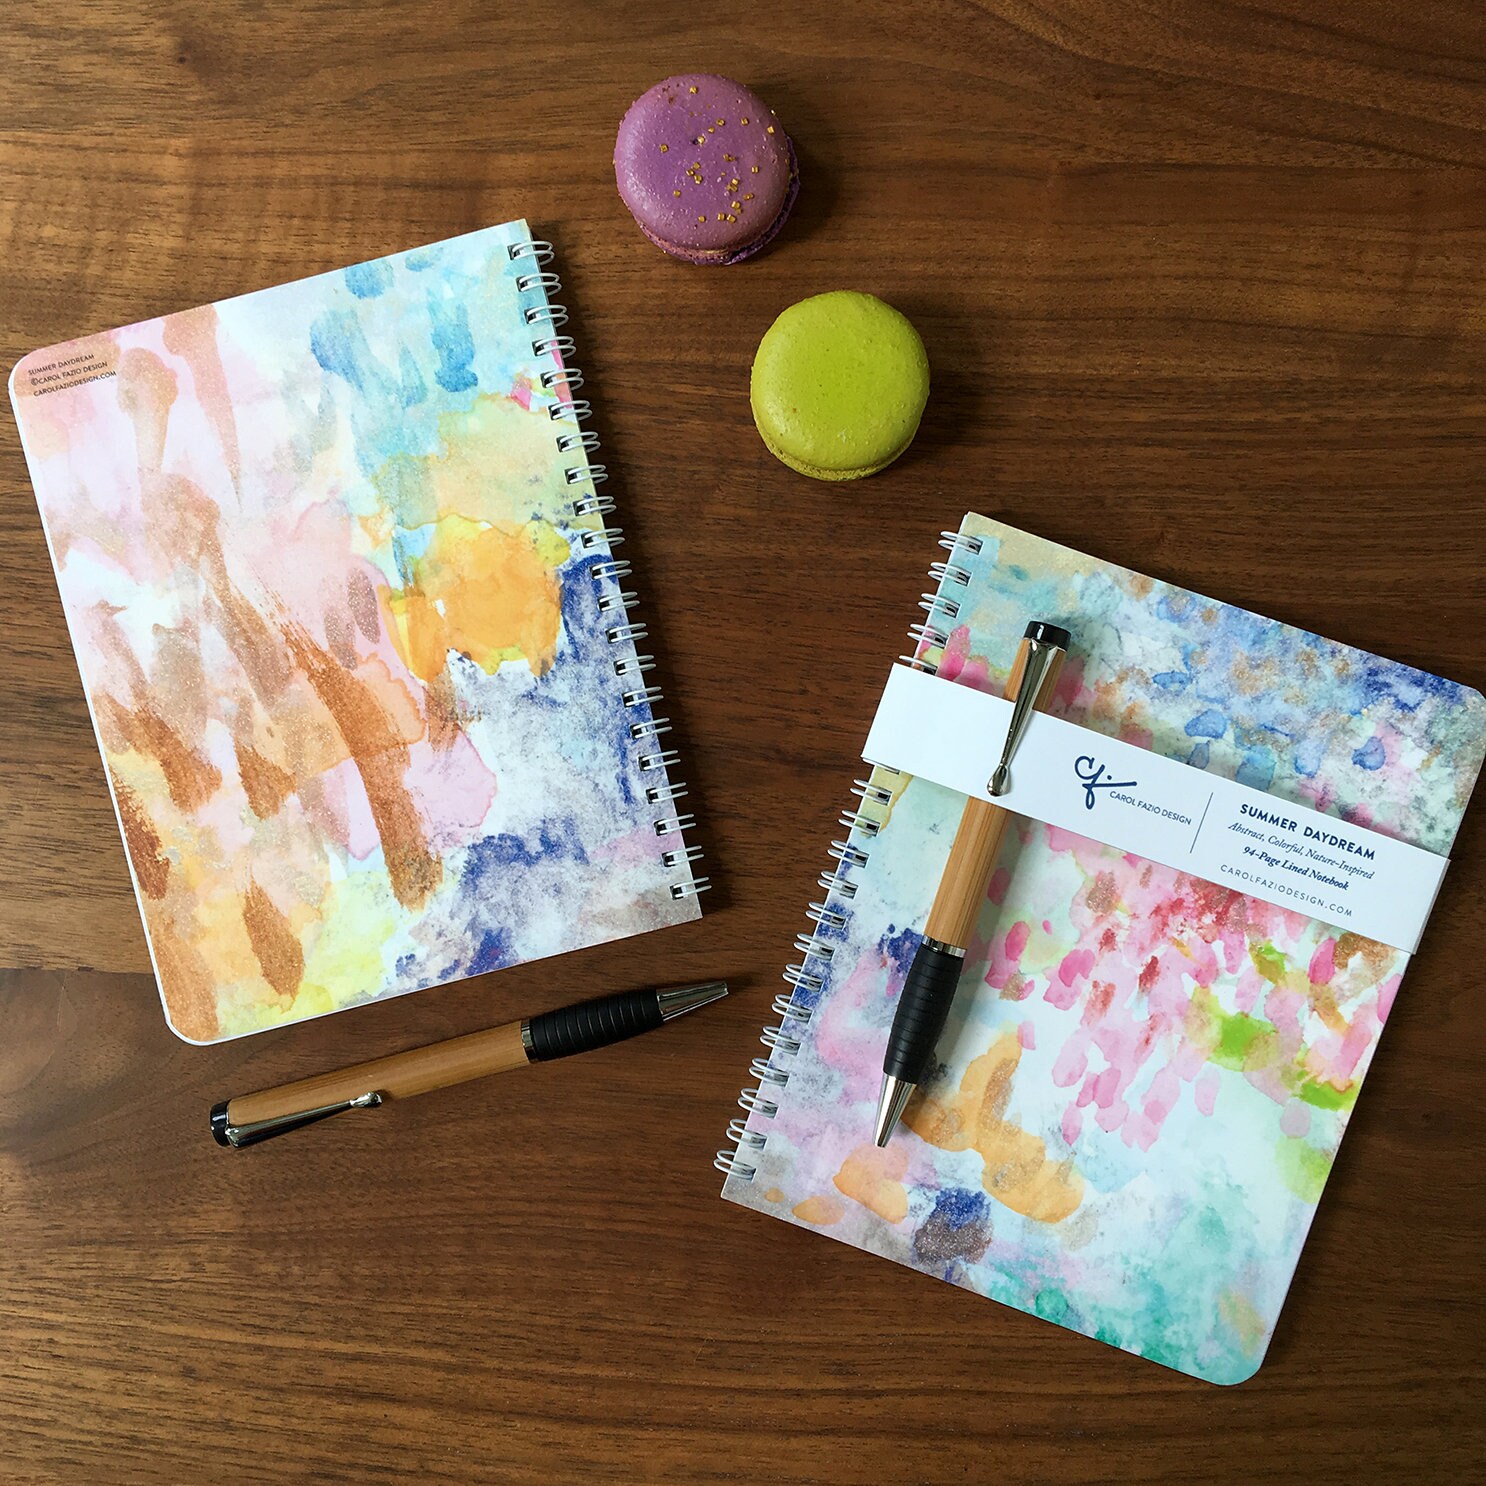 Using this watercolor journal as a notebook for daily art study and  watercolor notes : r/notebooks